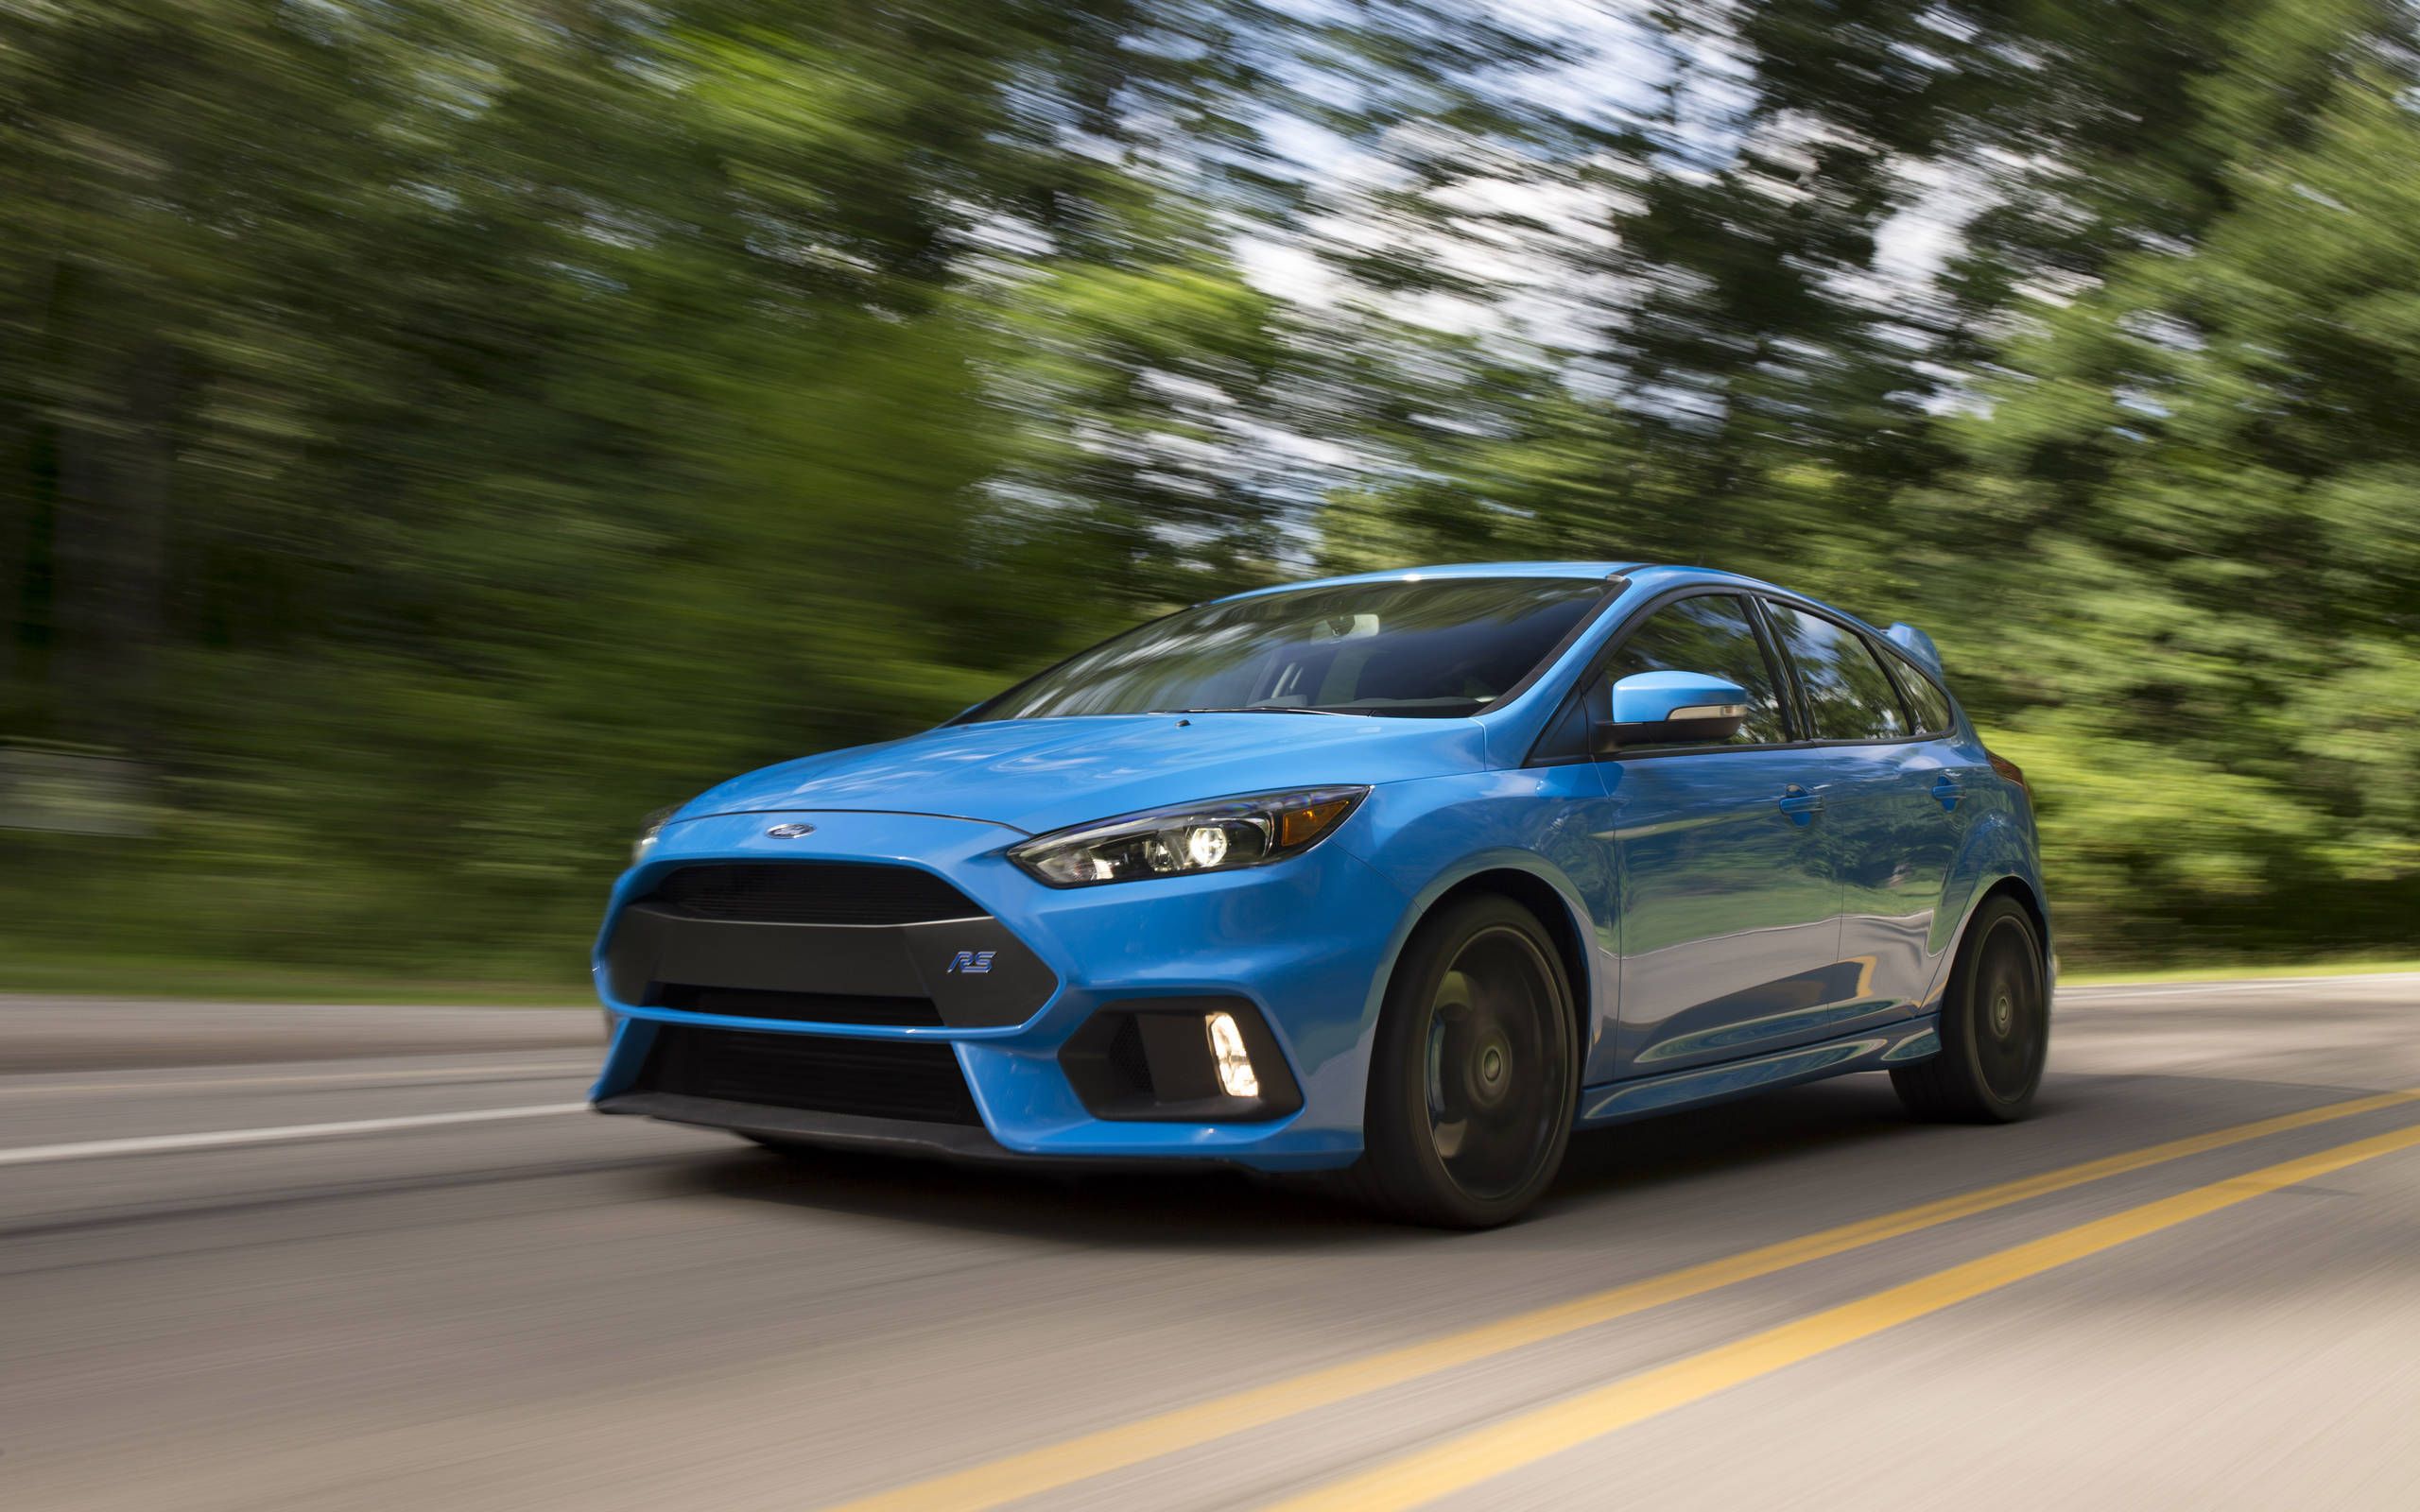 2016 Ford Focus Rs 5-Door Review: Ford'S Best Car Ever?